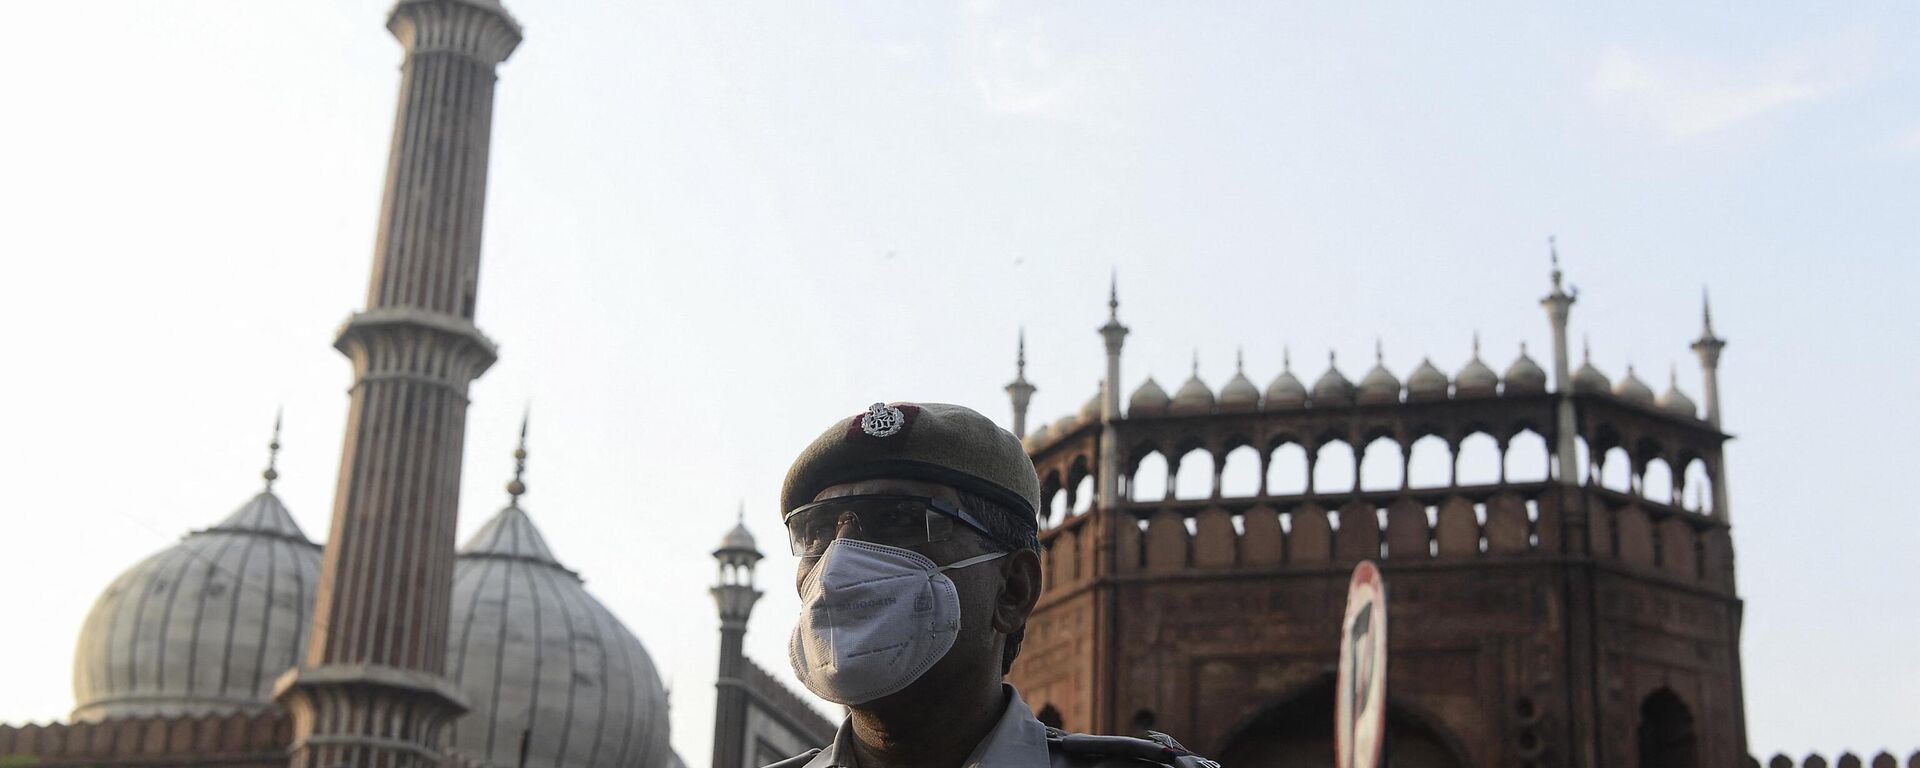 A police officer stands guard outside Jama Masjid during a government-imposed nationwide lockdown as a preventive measure against the spread of the COVID-19 coronavirus, in the old quarters of New Delhi on April 25, 2020. (Photo by SAJJAD HUSSAIN / AFP) - Sputnik India, 1920, 25.01.2023